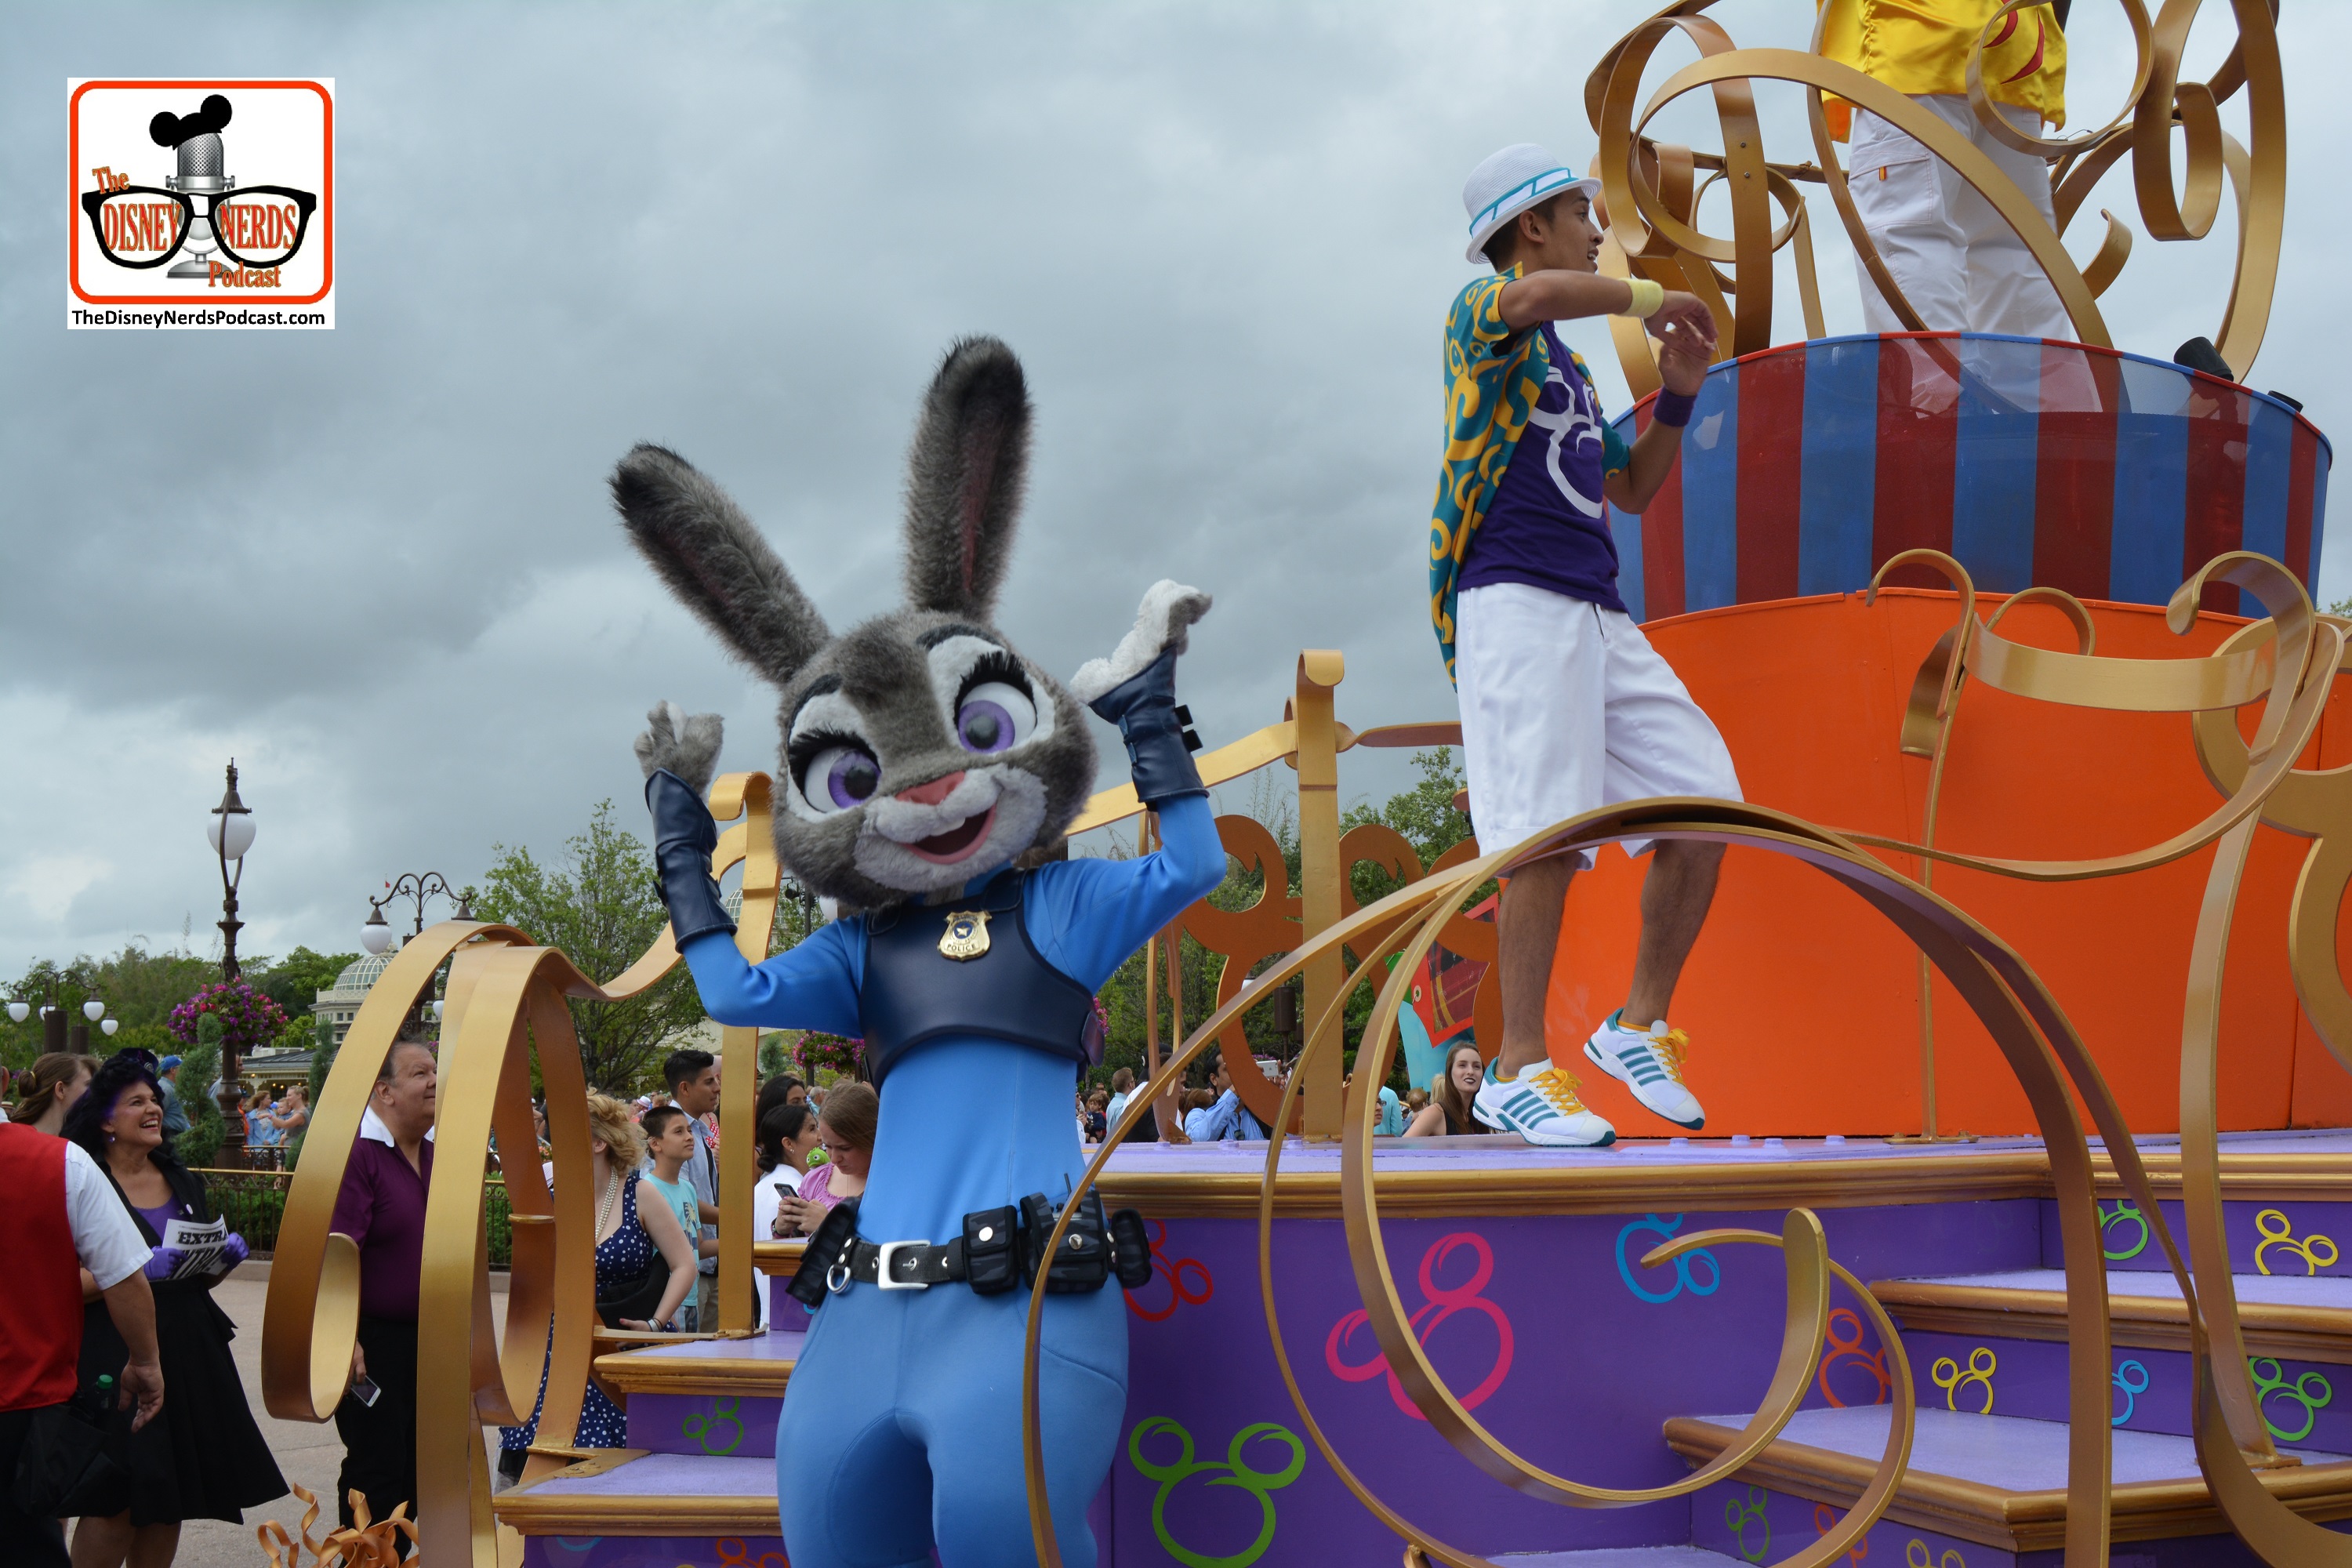 DNP April 2016 Photo Report: Magic Kingdom: Judy Hopps from Zootopia is part of the Move it shake it..